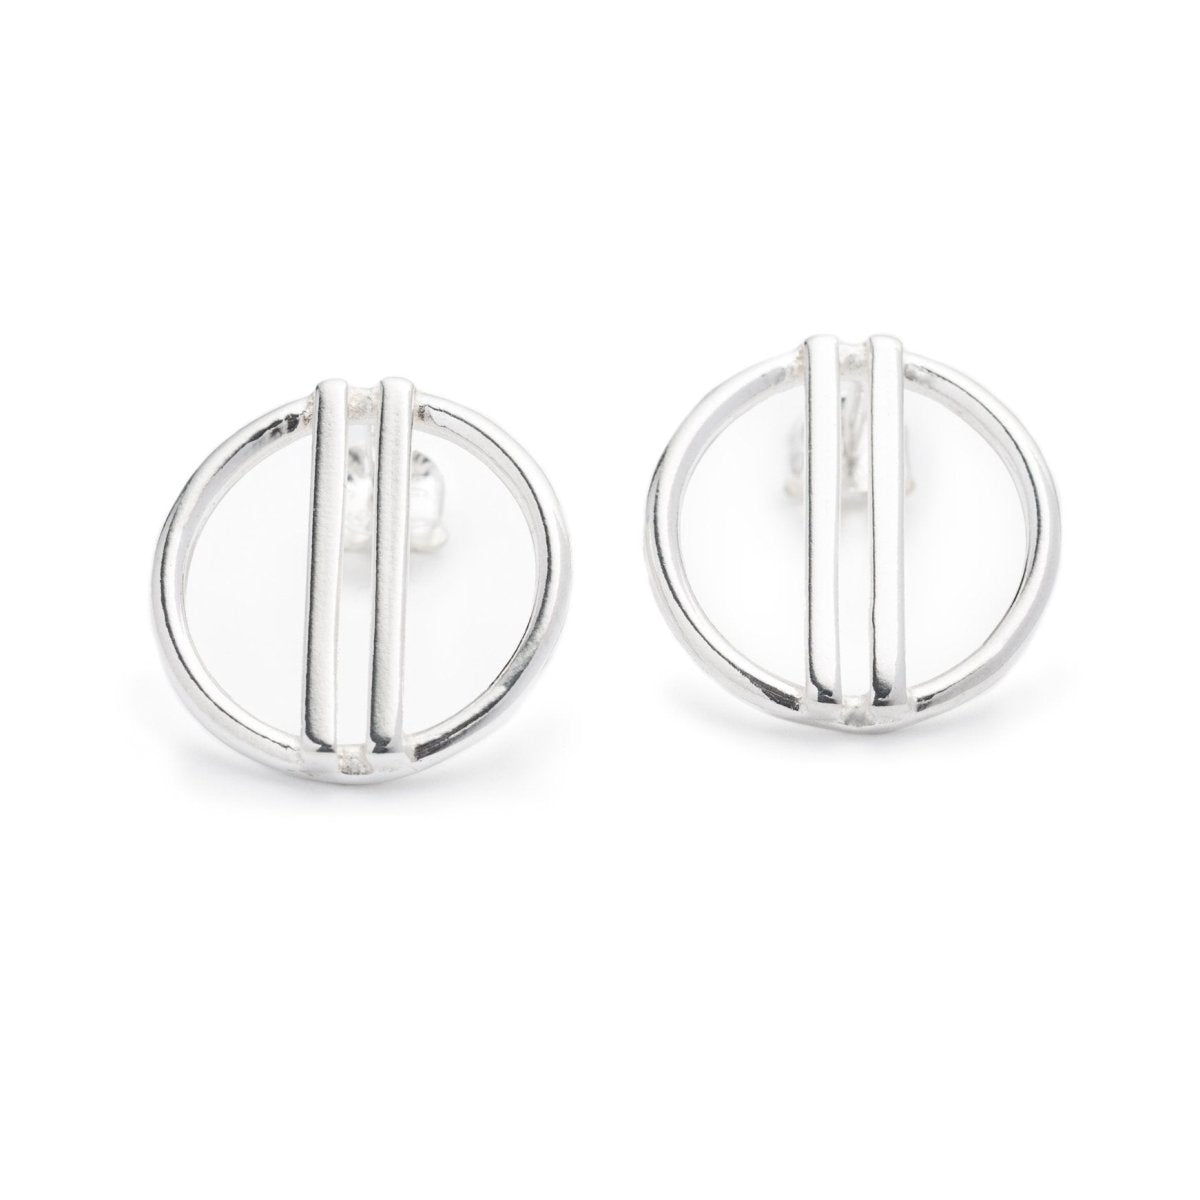 Minimal, modern, and shiny cast silver stud earrings, featuring a small, open circle with two vertical bars running through the center. Hand-crafted in Portland, Oregon.